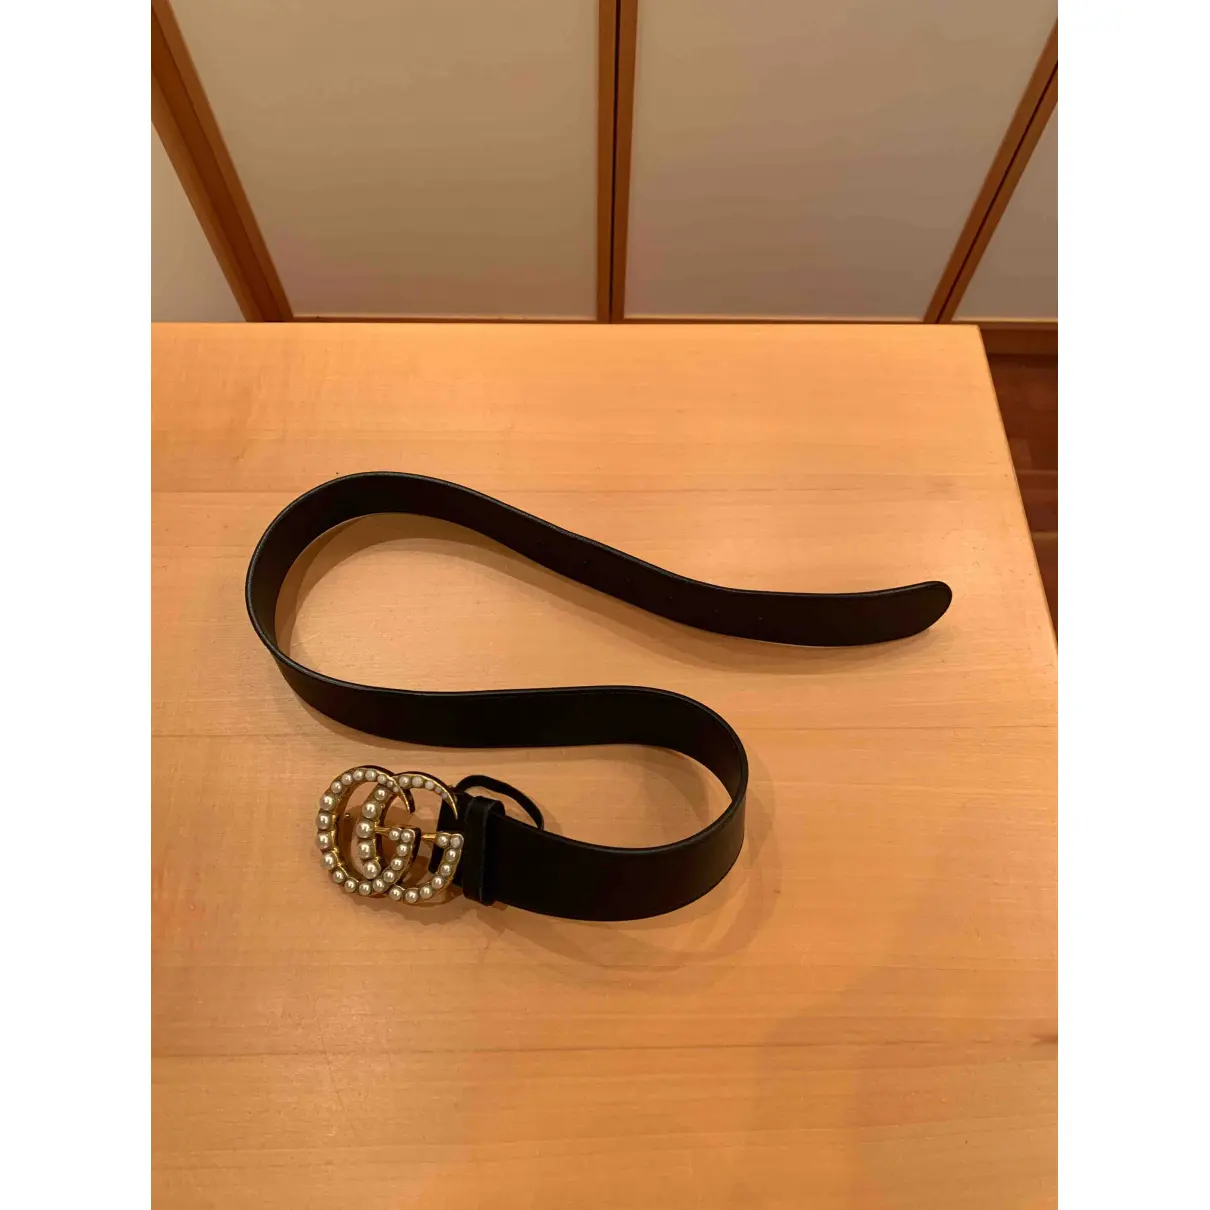 Buy Gucci GG Buckle leather belt online